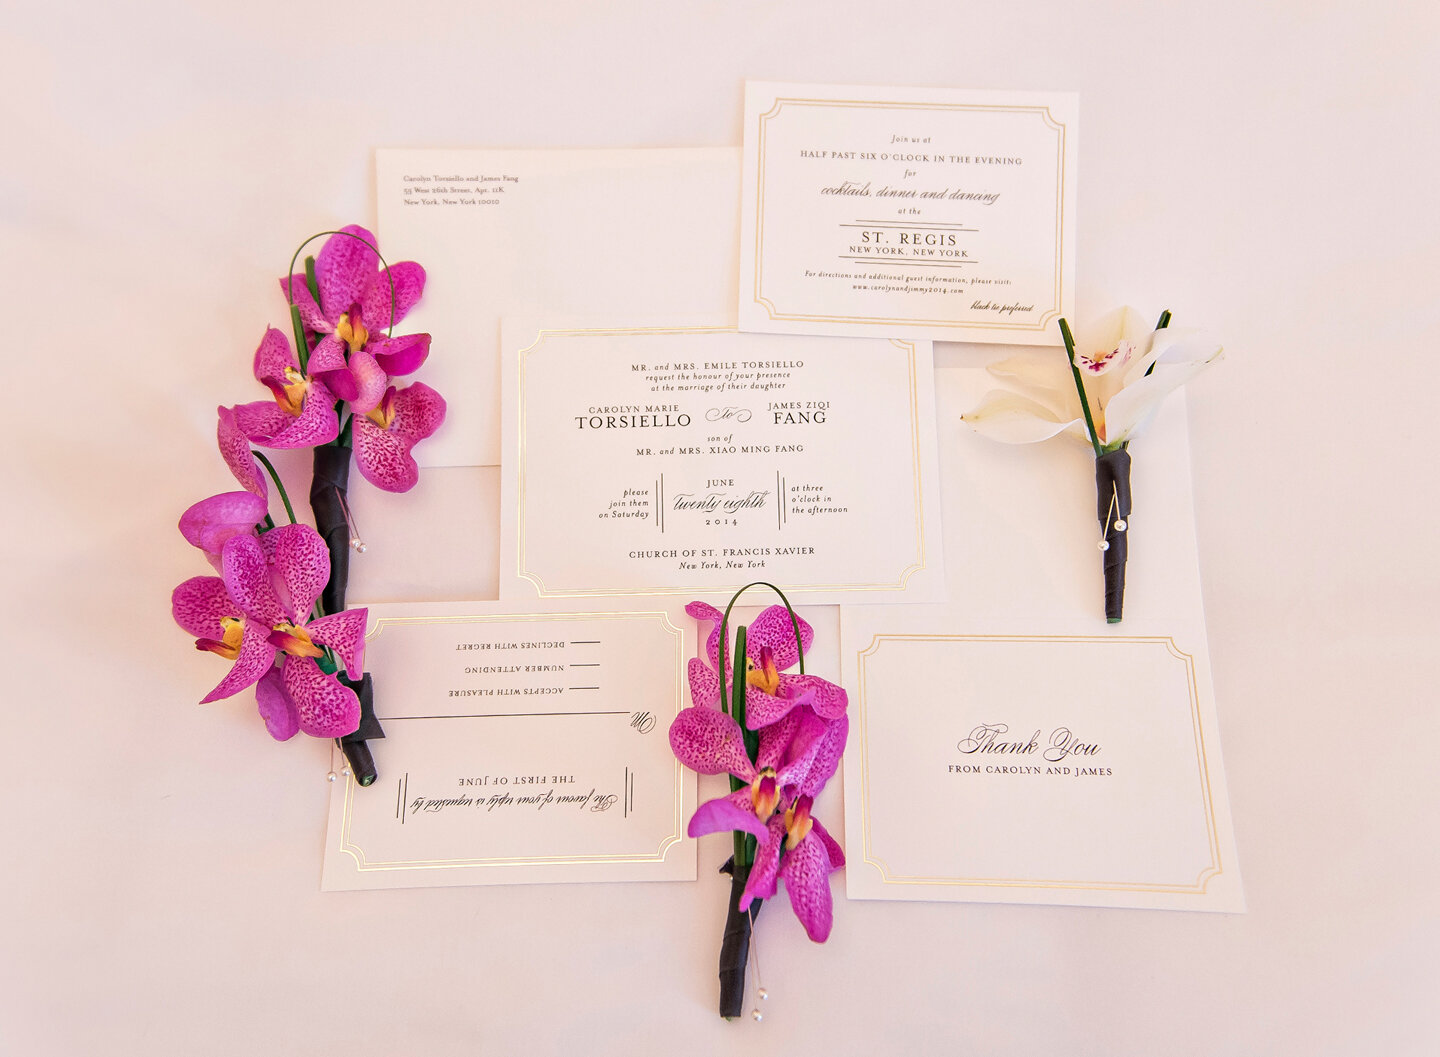 Wedding invitations covered in flowers